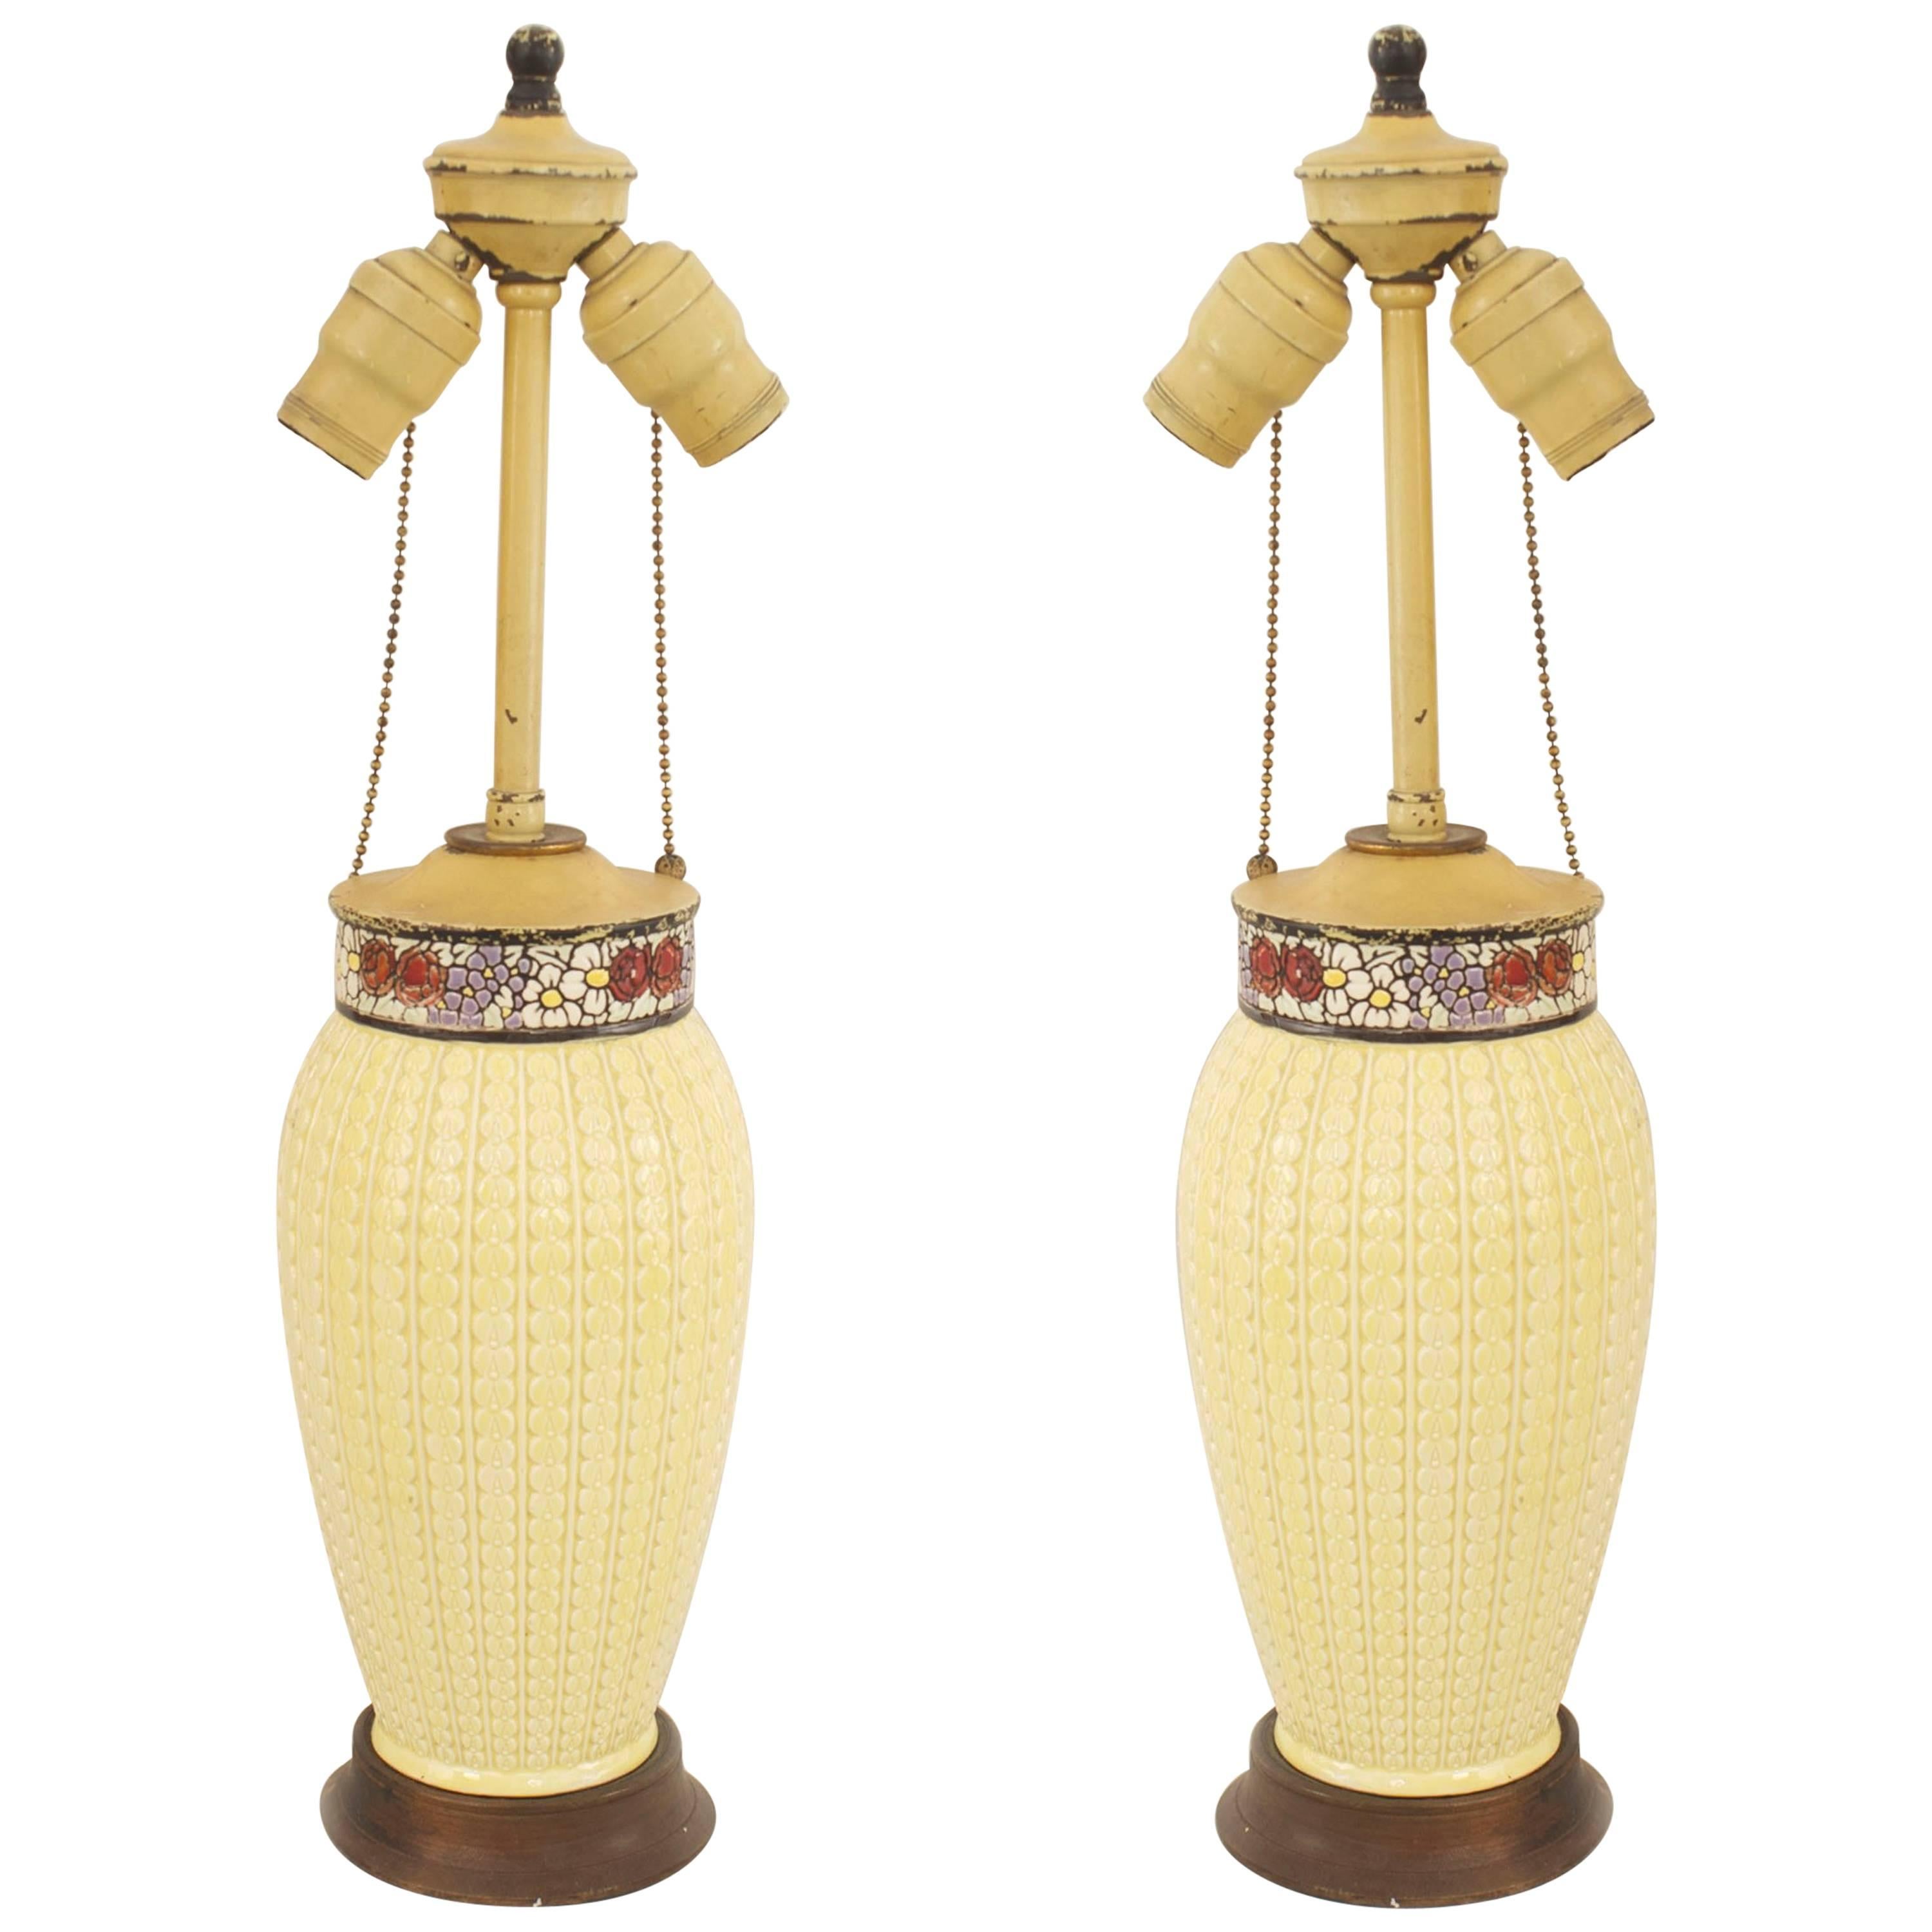 Pair of American Arts and Crafts Yellow Porcelain Table Lamps